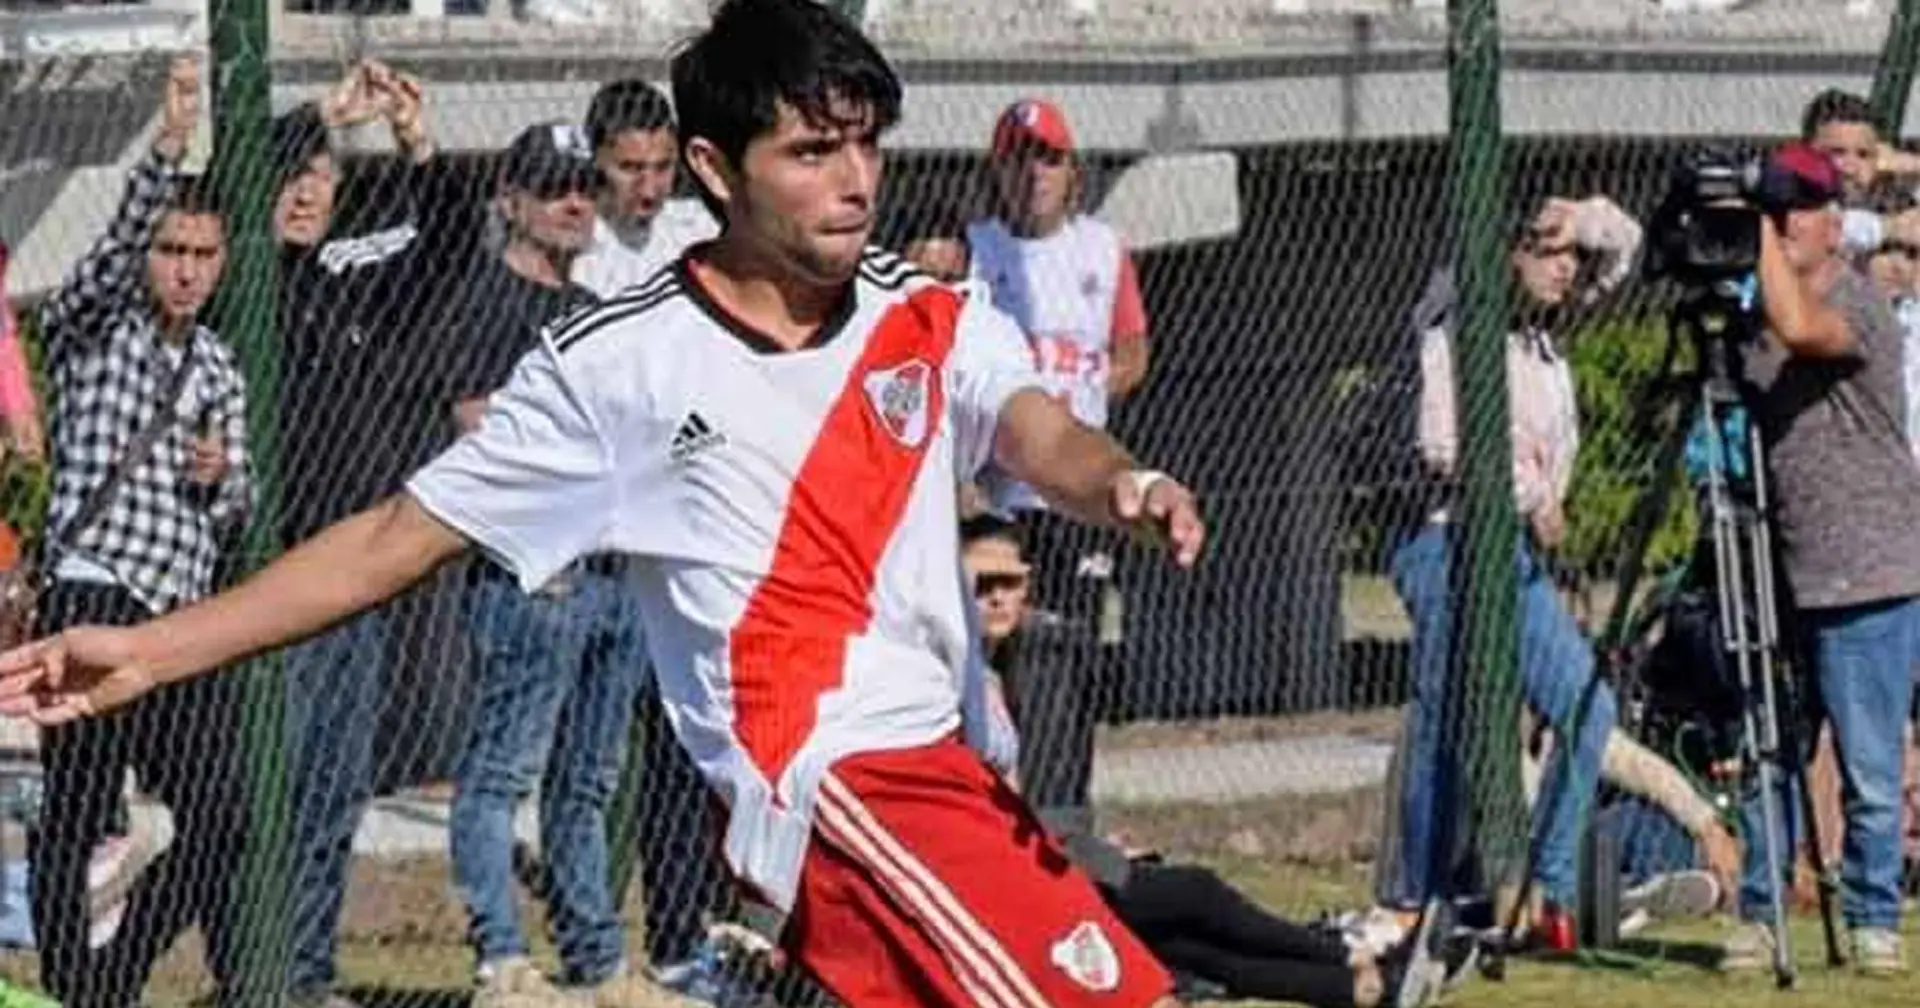 Chelsea among clubs reportedly keeping tabs on teenage River Plate right-back Luciano Vera